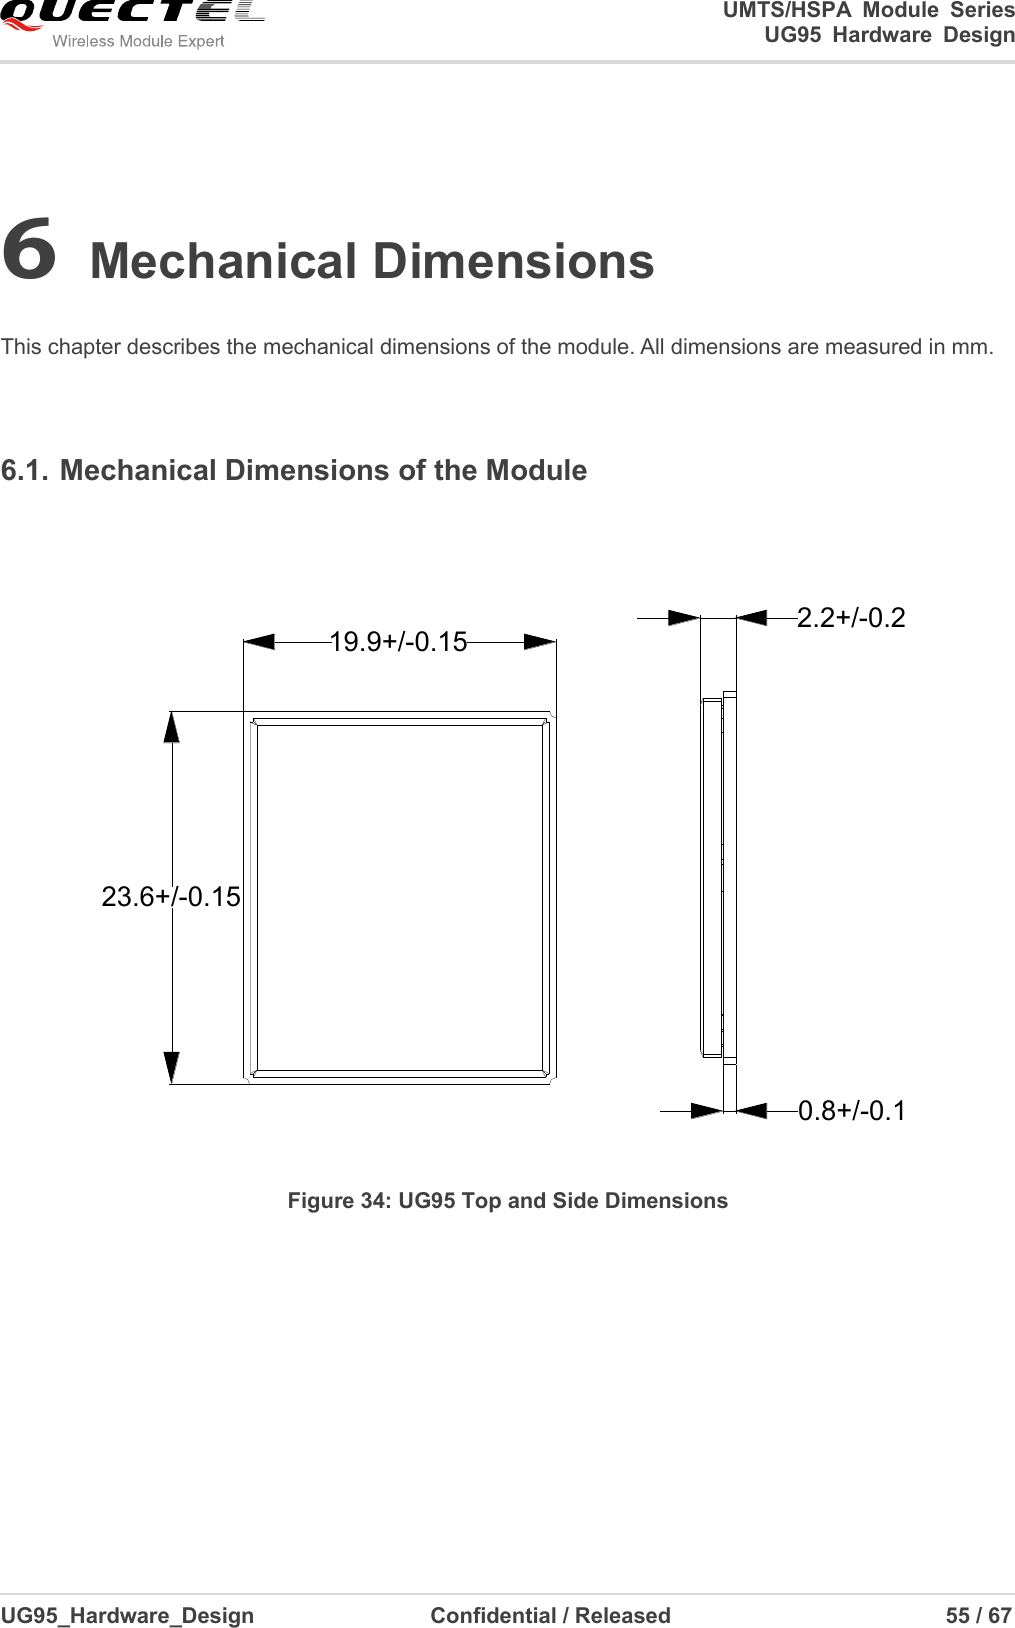                                                                                                                                               UMTS/HSPA  Module  Series                                                                 UG95  Hardware  Design  UG95_Hardware_Design                  Confidential / Released                             55 / 67    6 Mechanical Dimensions  This chapter describes the mechanical dimensions of the module. All dimensions are measured in mm.  6.1. Mechanical Dimensions of the Module    0.8+/-0.12.2+/-0.219.9+/-0.1523.6+/-0.15 Figure 34: UG95 Top and Side Dimensions  